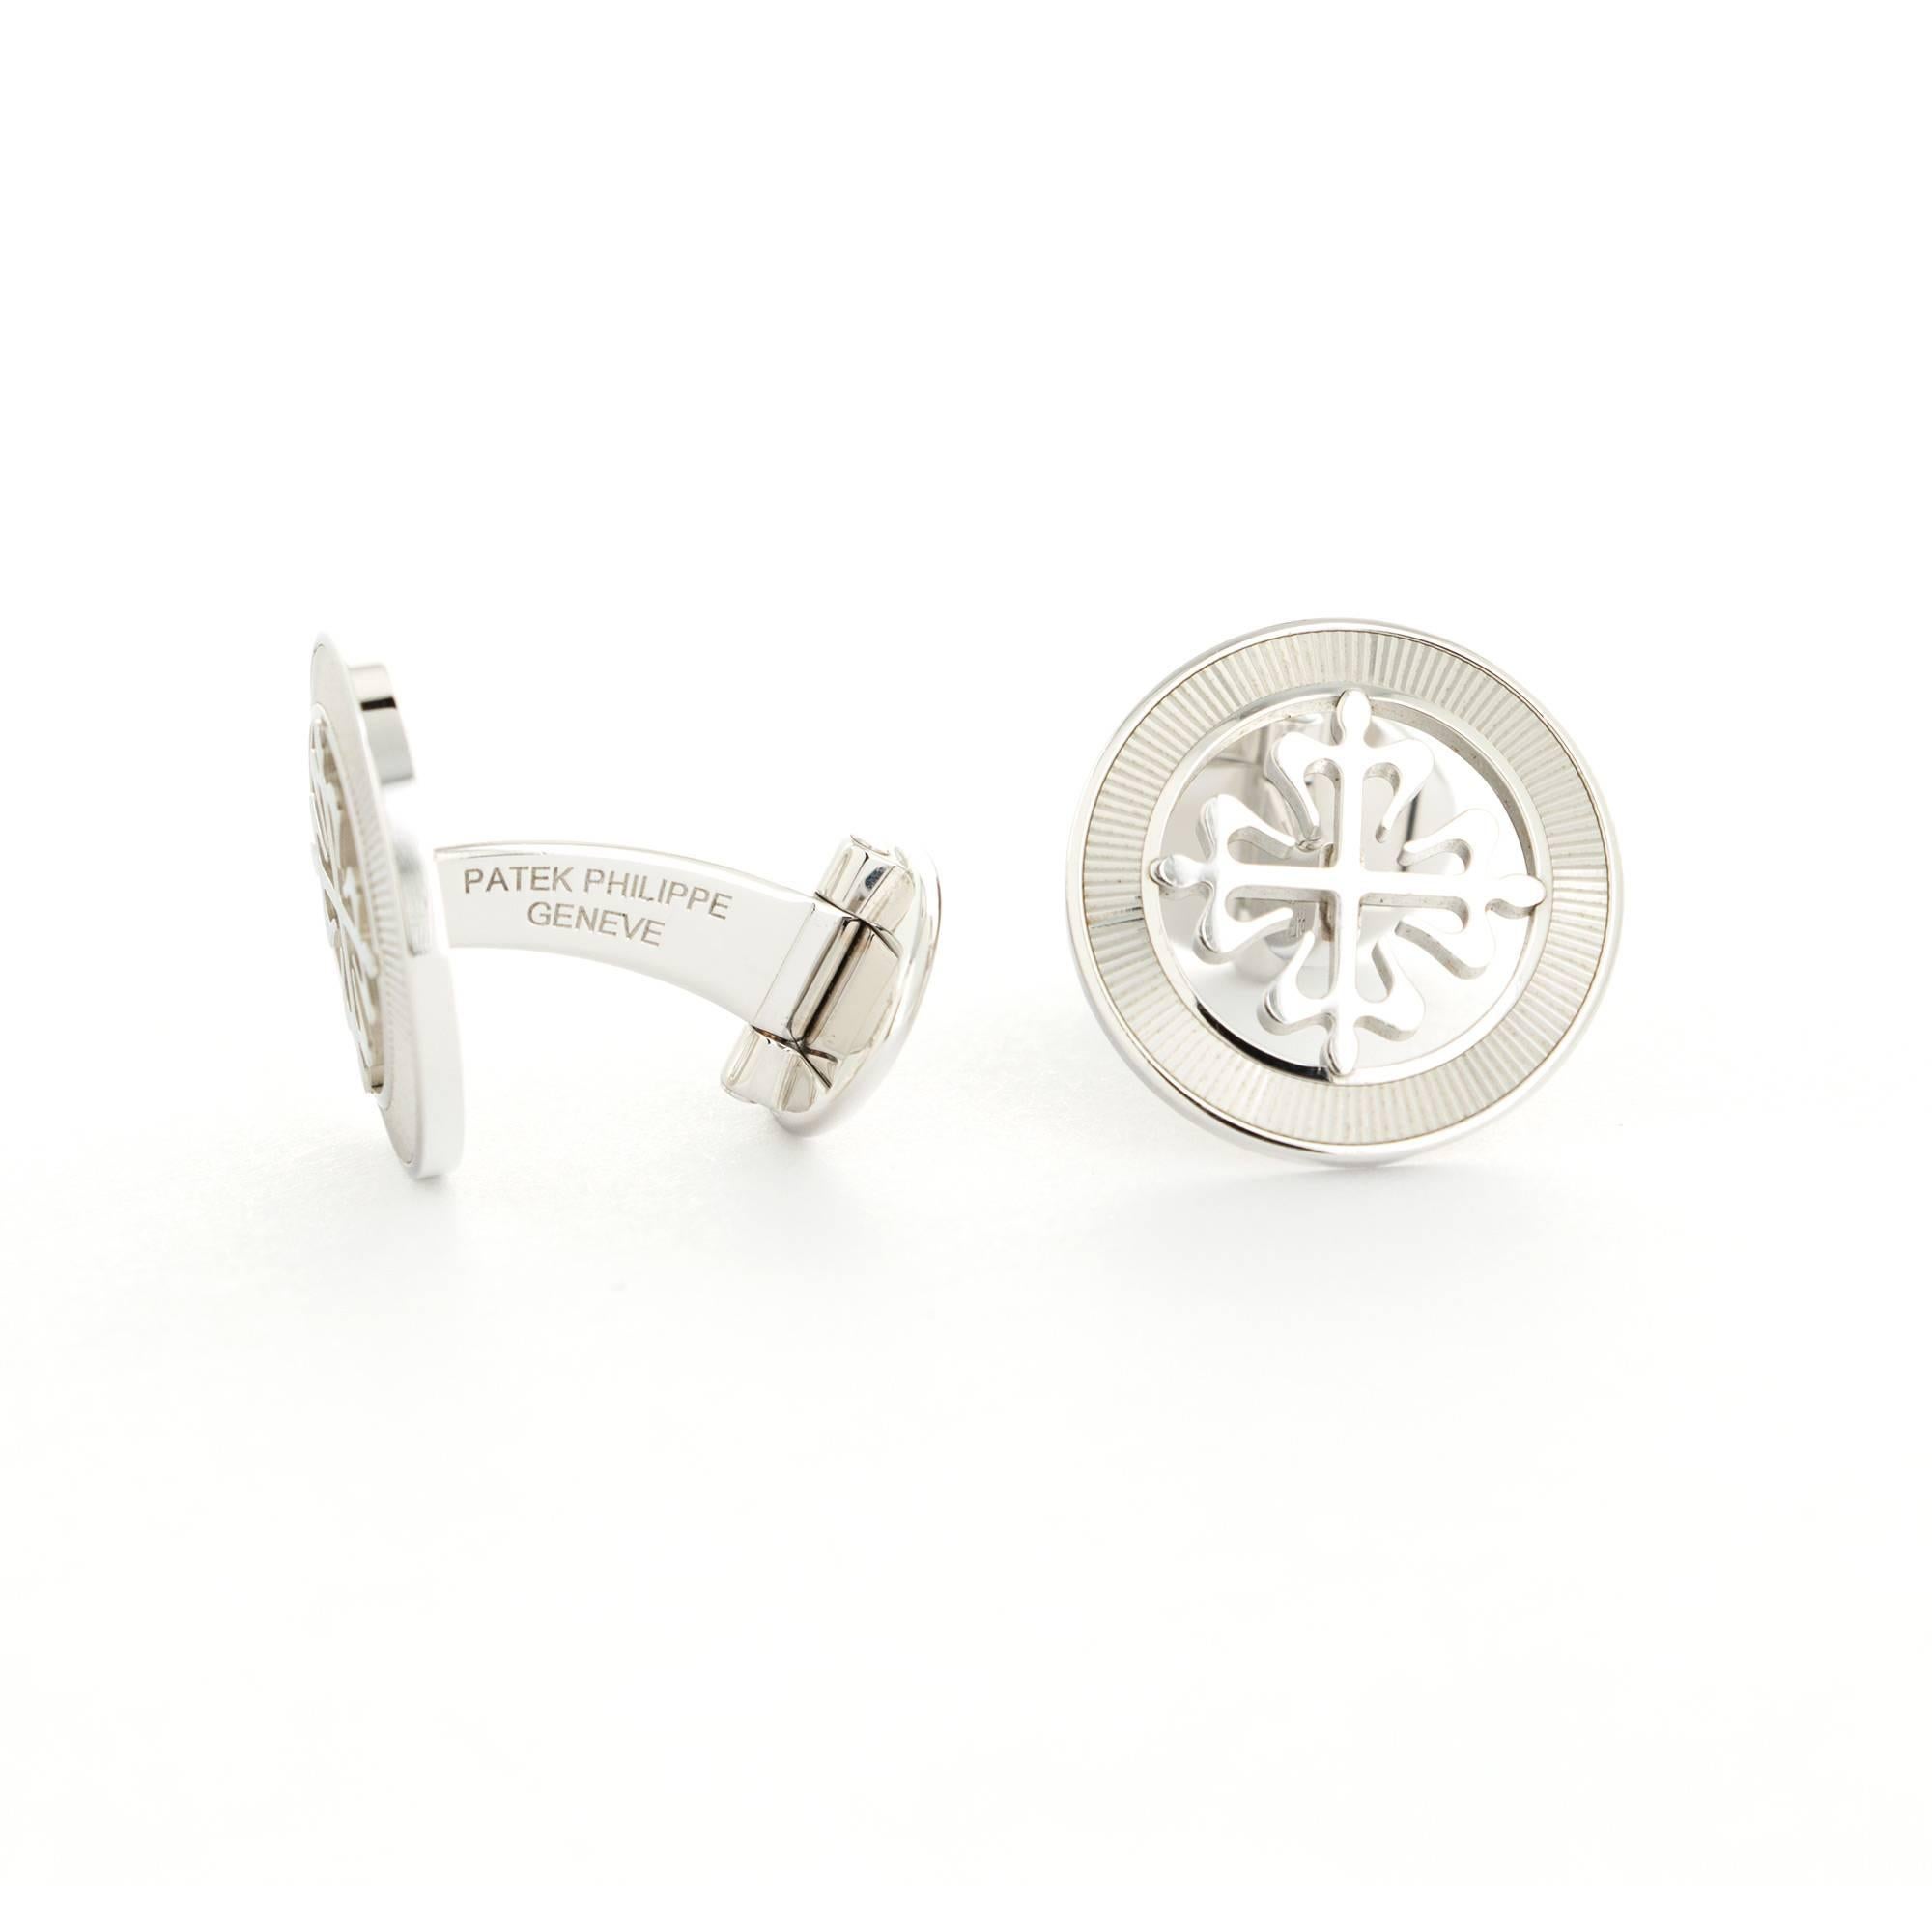 A Pair of 18k White Gold Cufflinks by Patek Philippe from the 